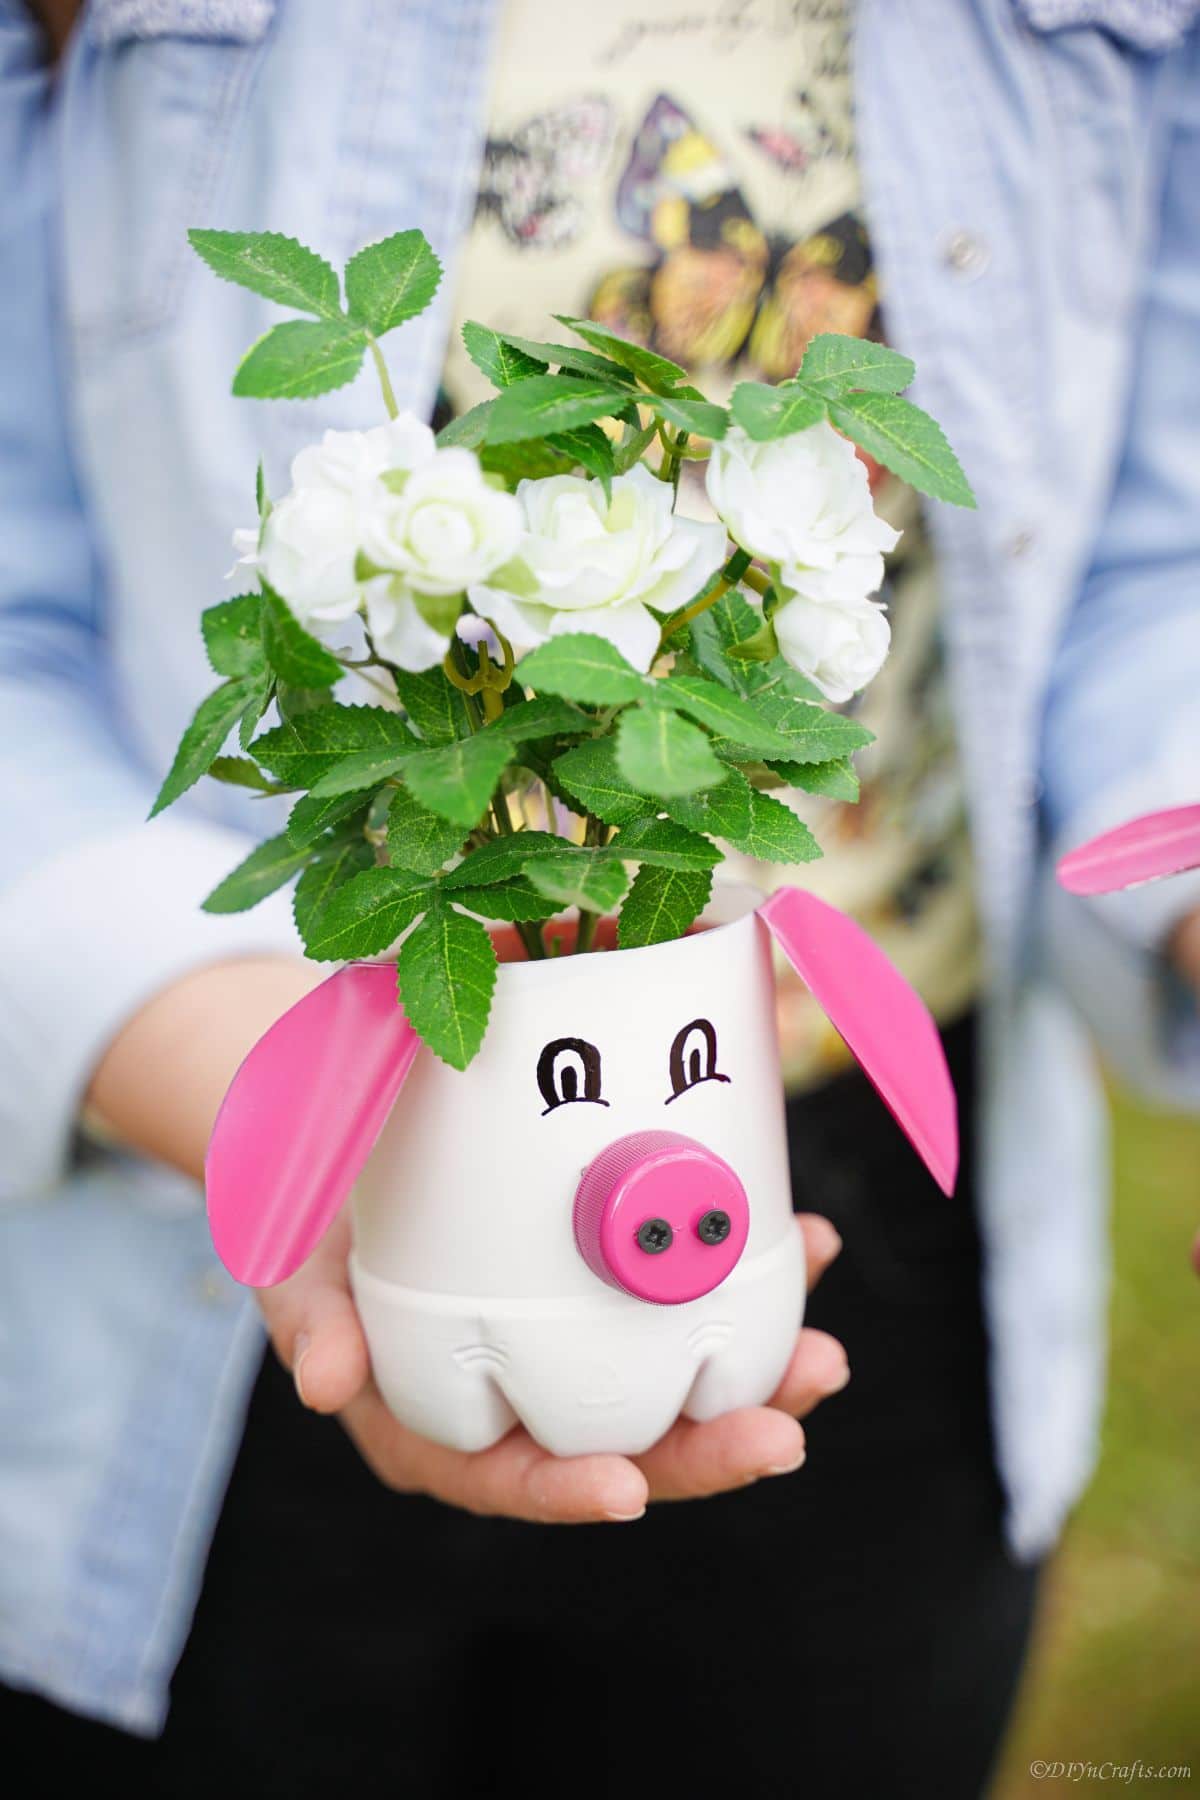 woman holding plastic bottle pig planter in her hand